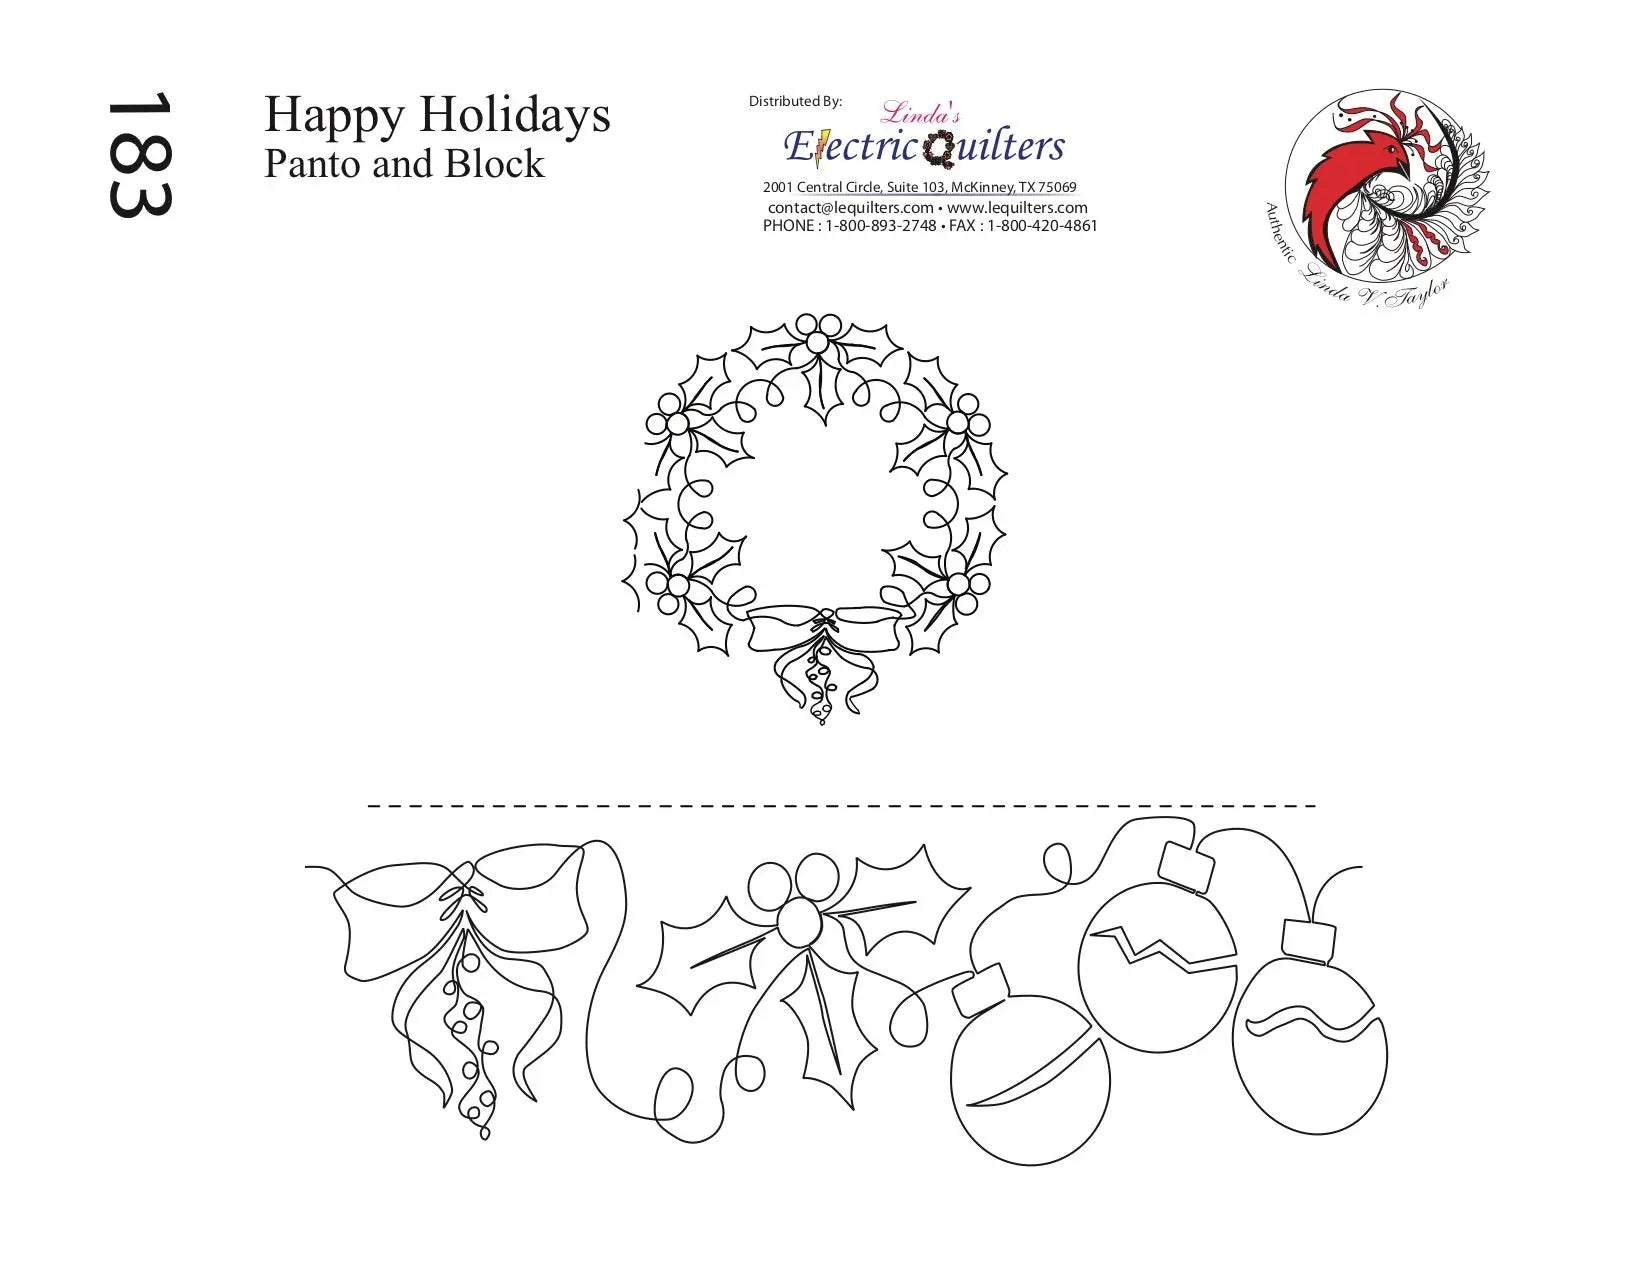 183 Happy Holidays Pantograph with Blocks by Linda V. Taylor - Linda's Electric Quilters